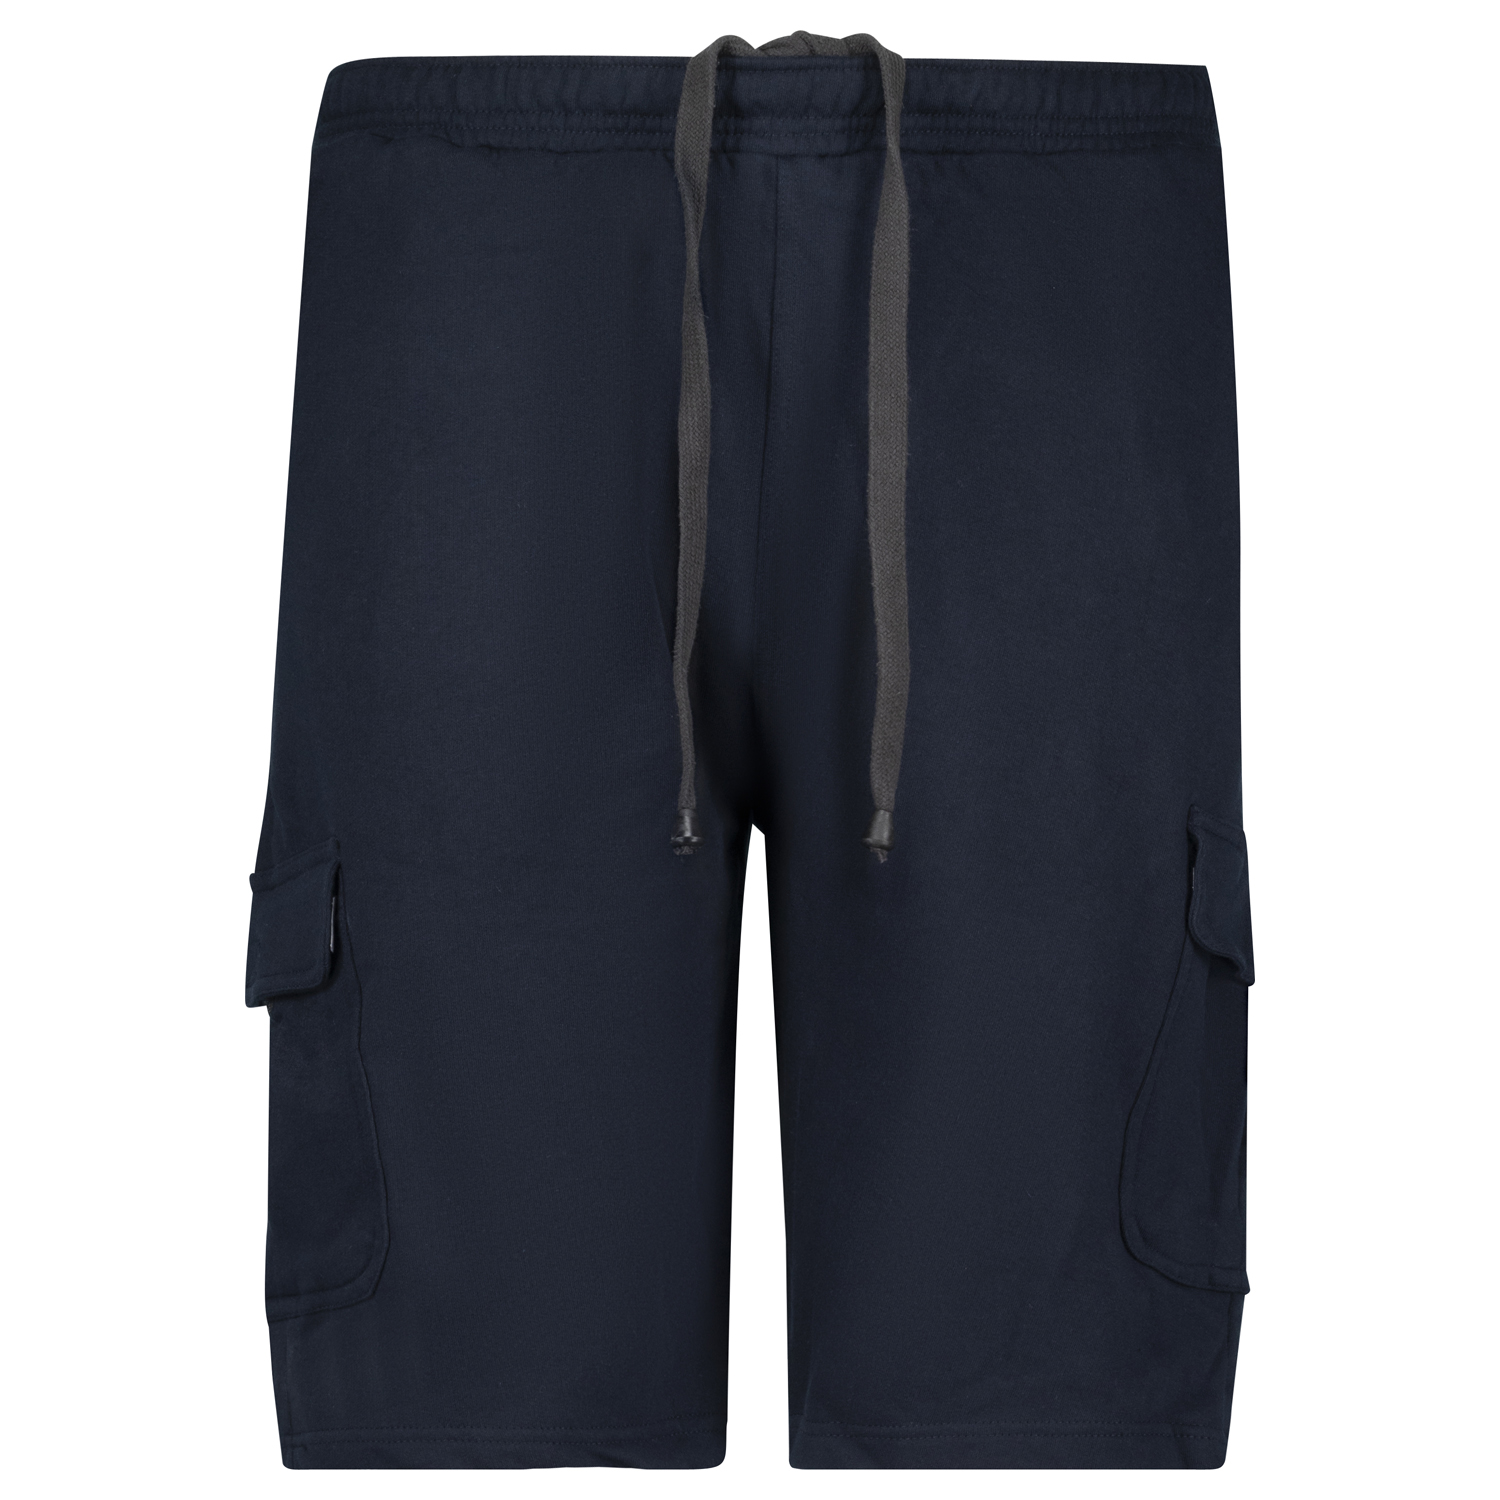 Cargo shorts in navy for men by Adamo series "Athen" in oversizes up to 14XL